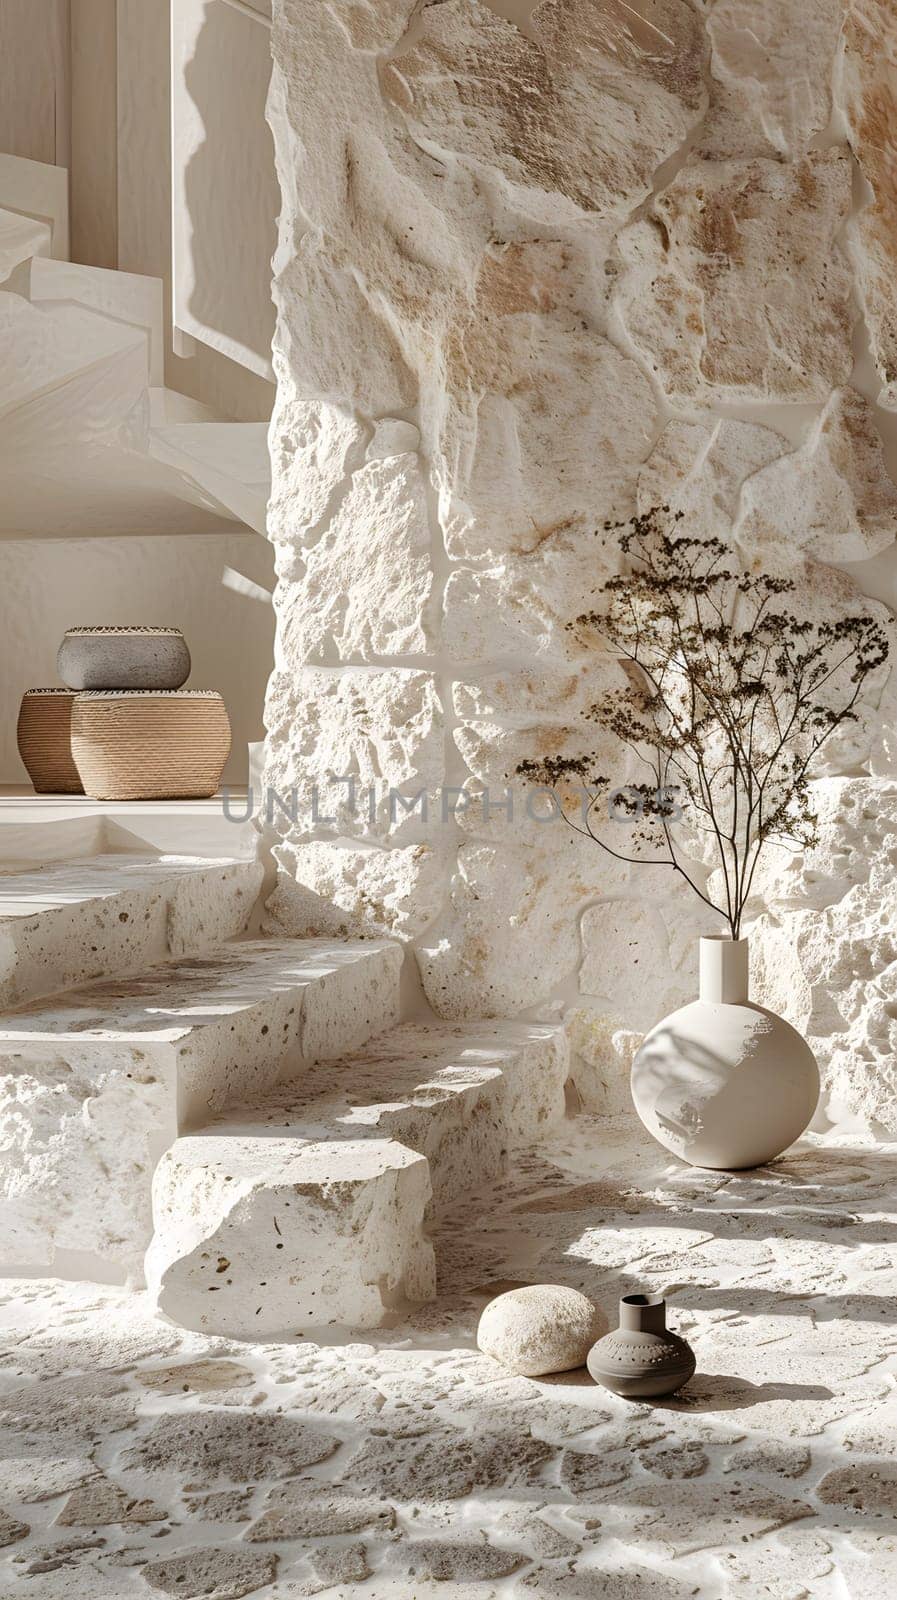 A staircase made of wood leads up to a stone wall with a vase holding a plant. The ancient bedrock carved with history and art adds to the landscape